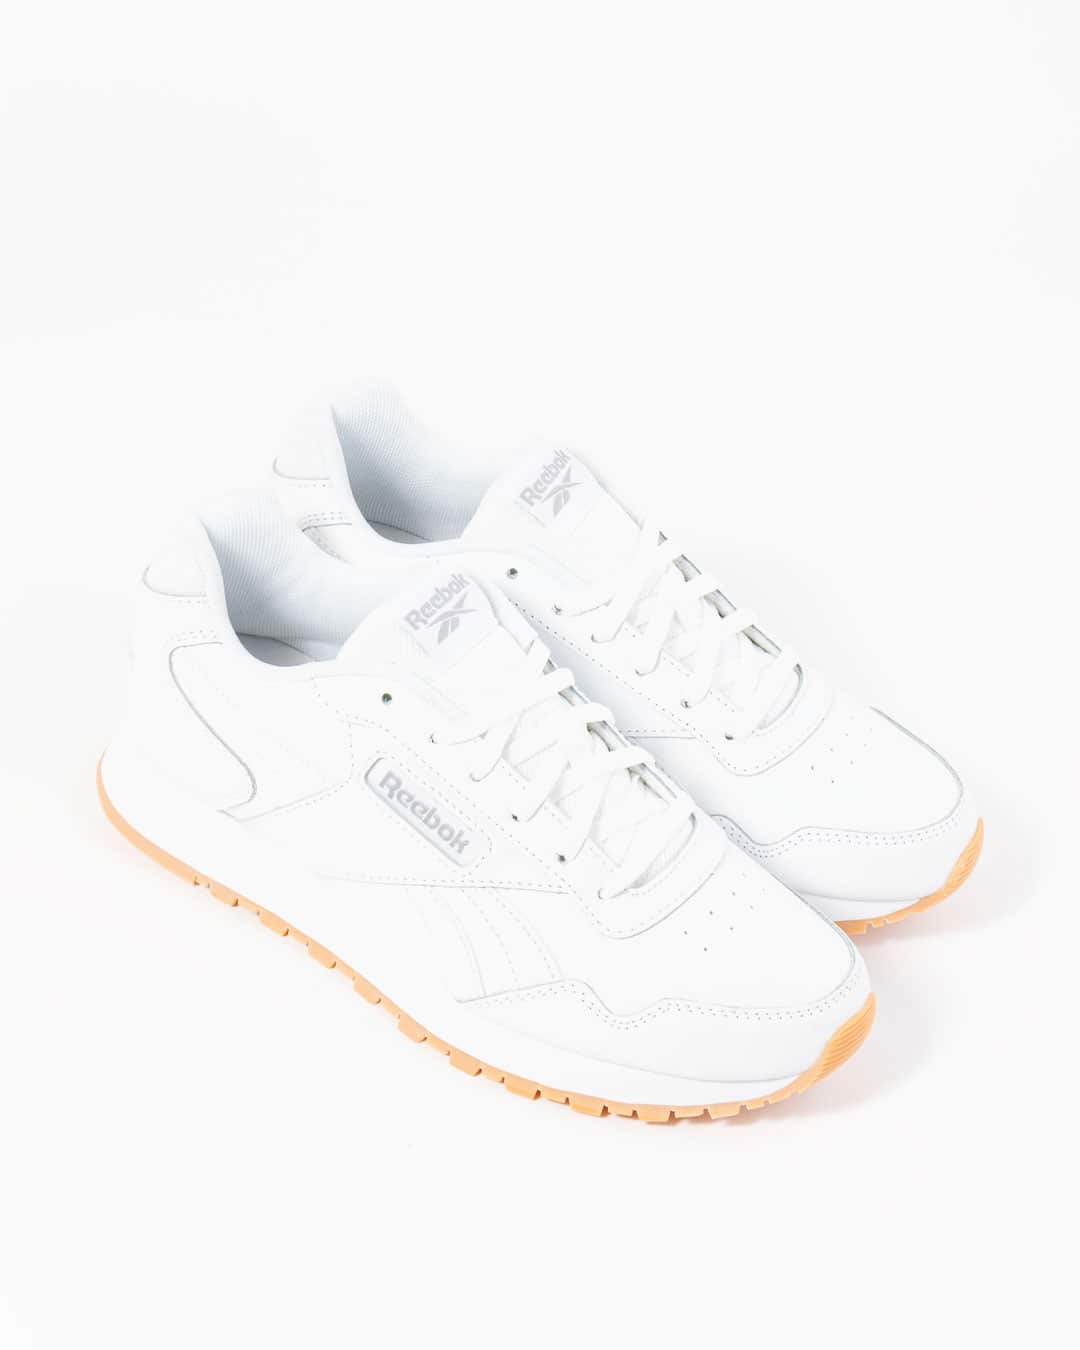 Reebok Ladies sneakers white wiith gum sole side view